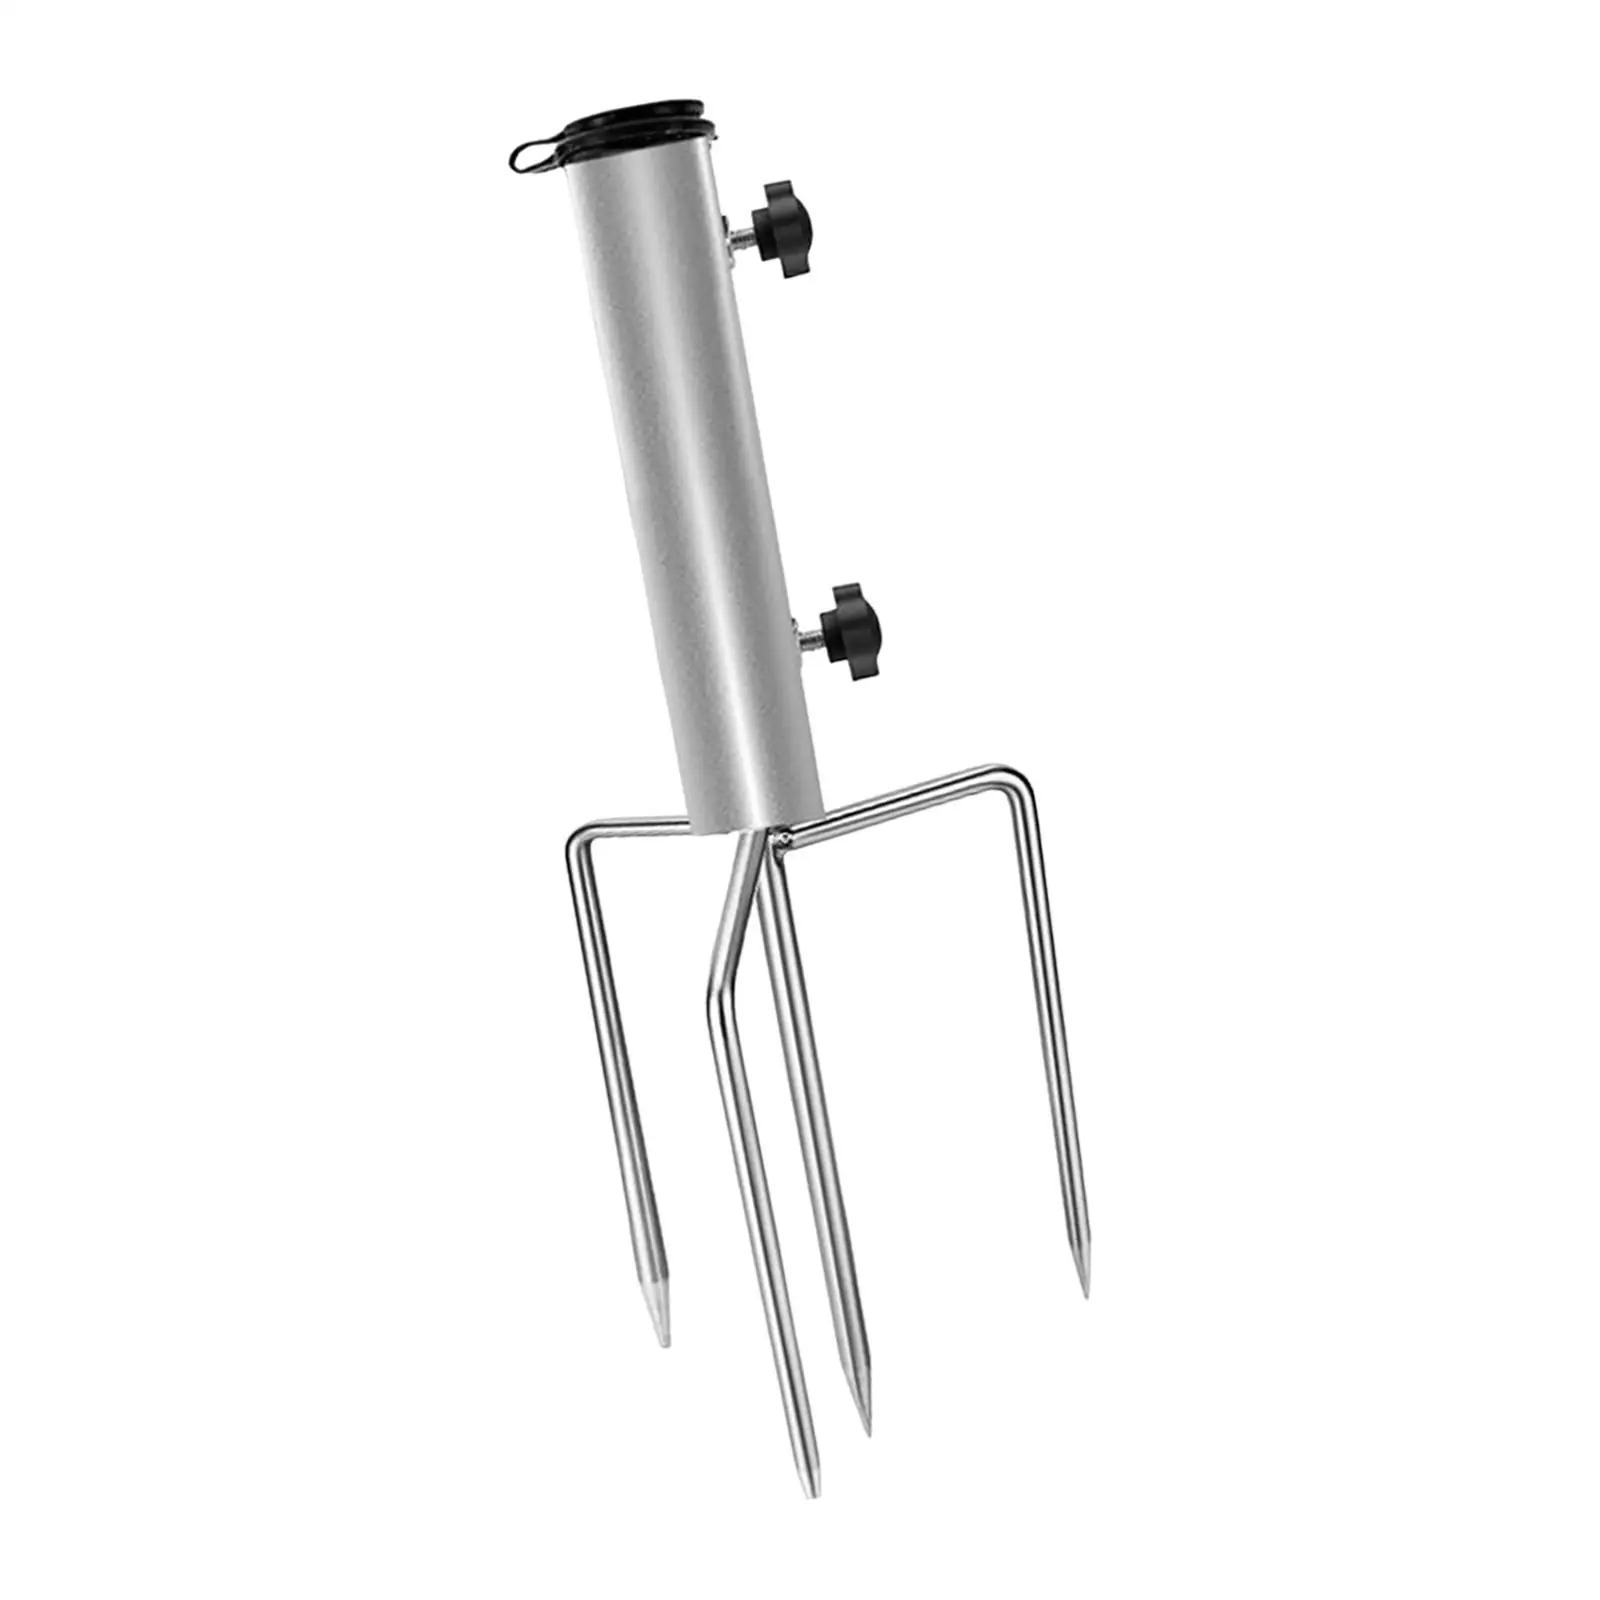 Parasol Holder with 4 Spikes Sturdy Stable Reliable Portable Umbrella Base Parasol Anchor for Park Backyard Fishing Picnics BBQ